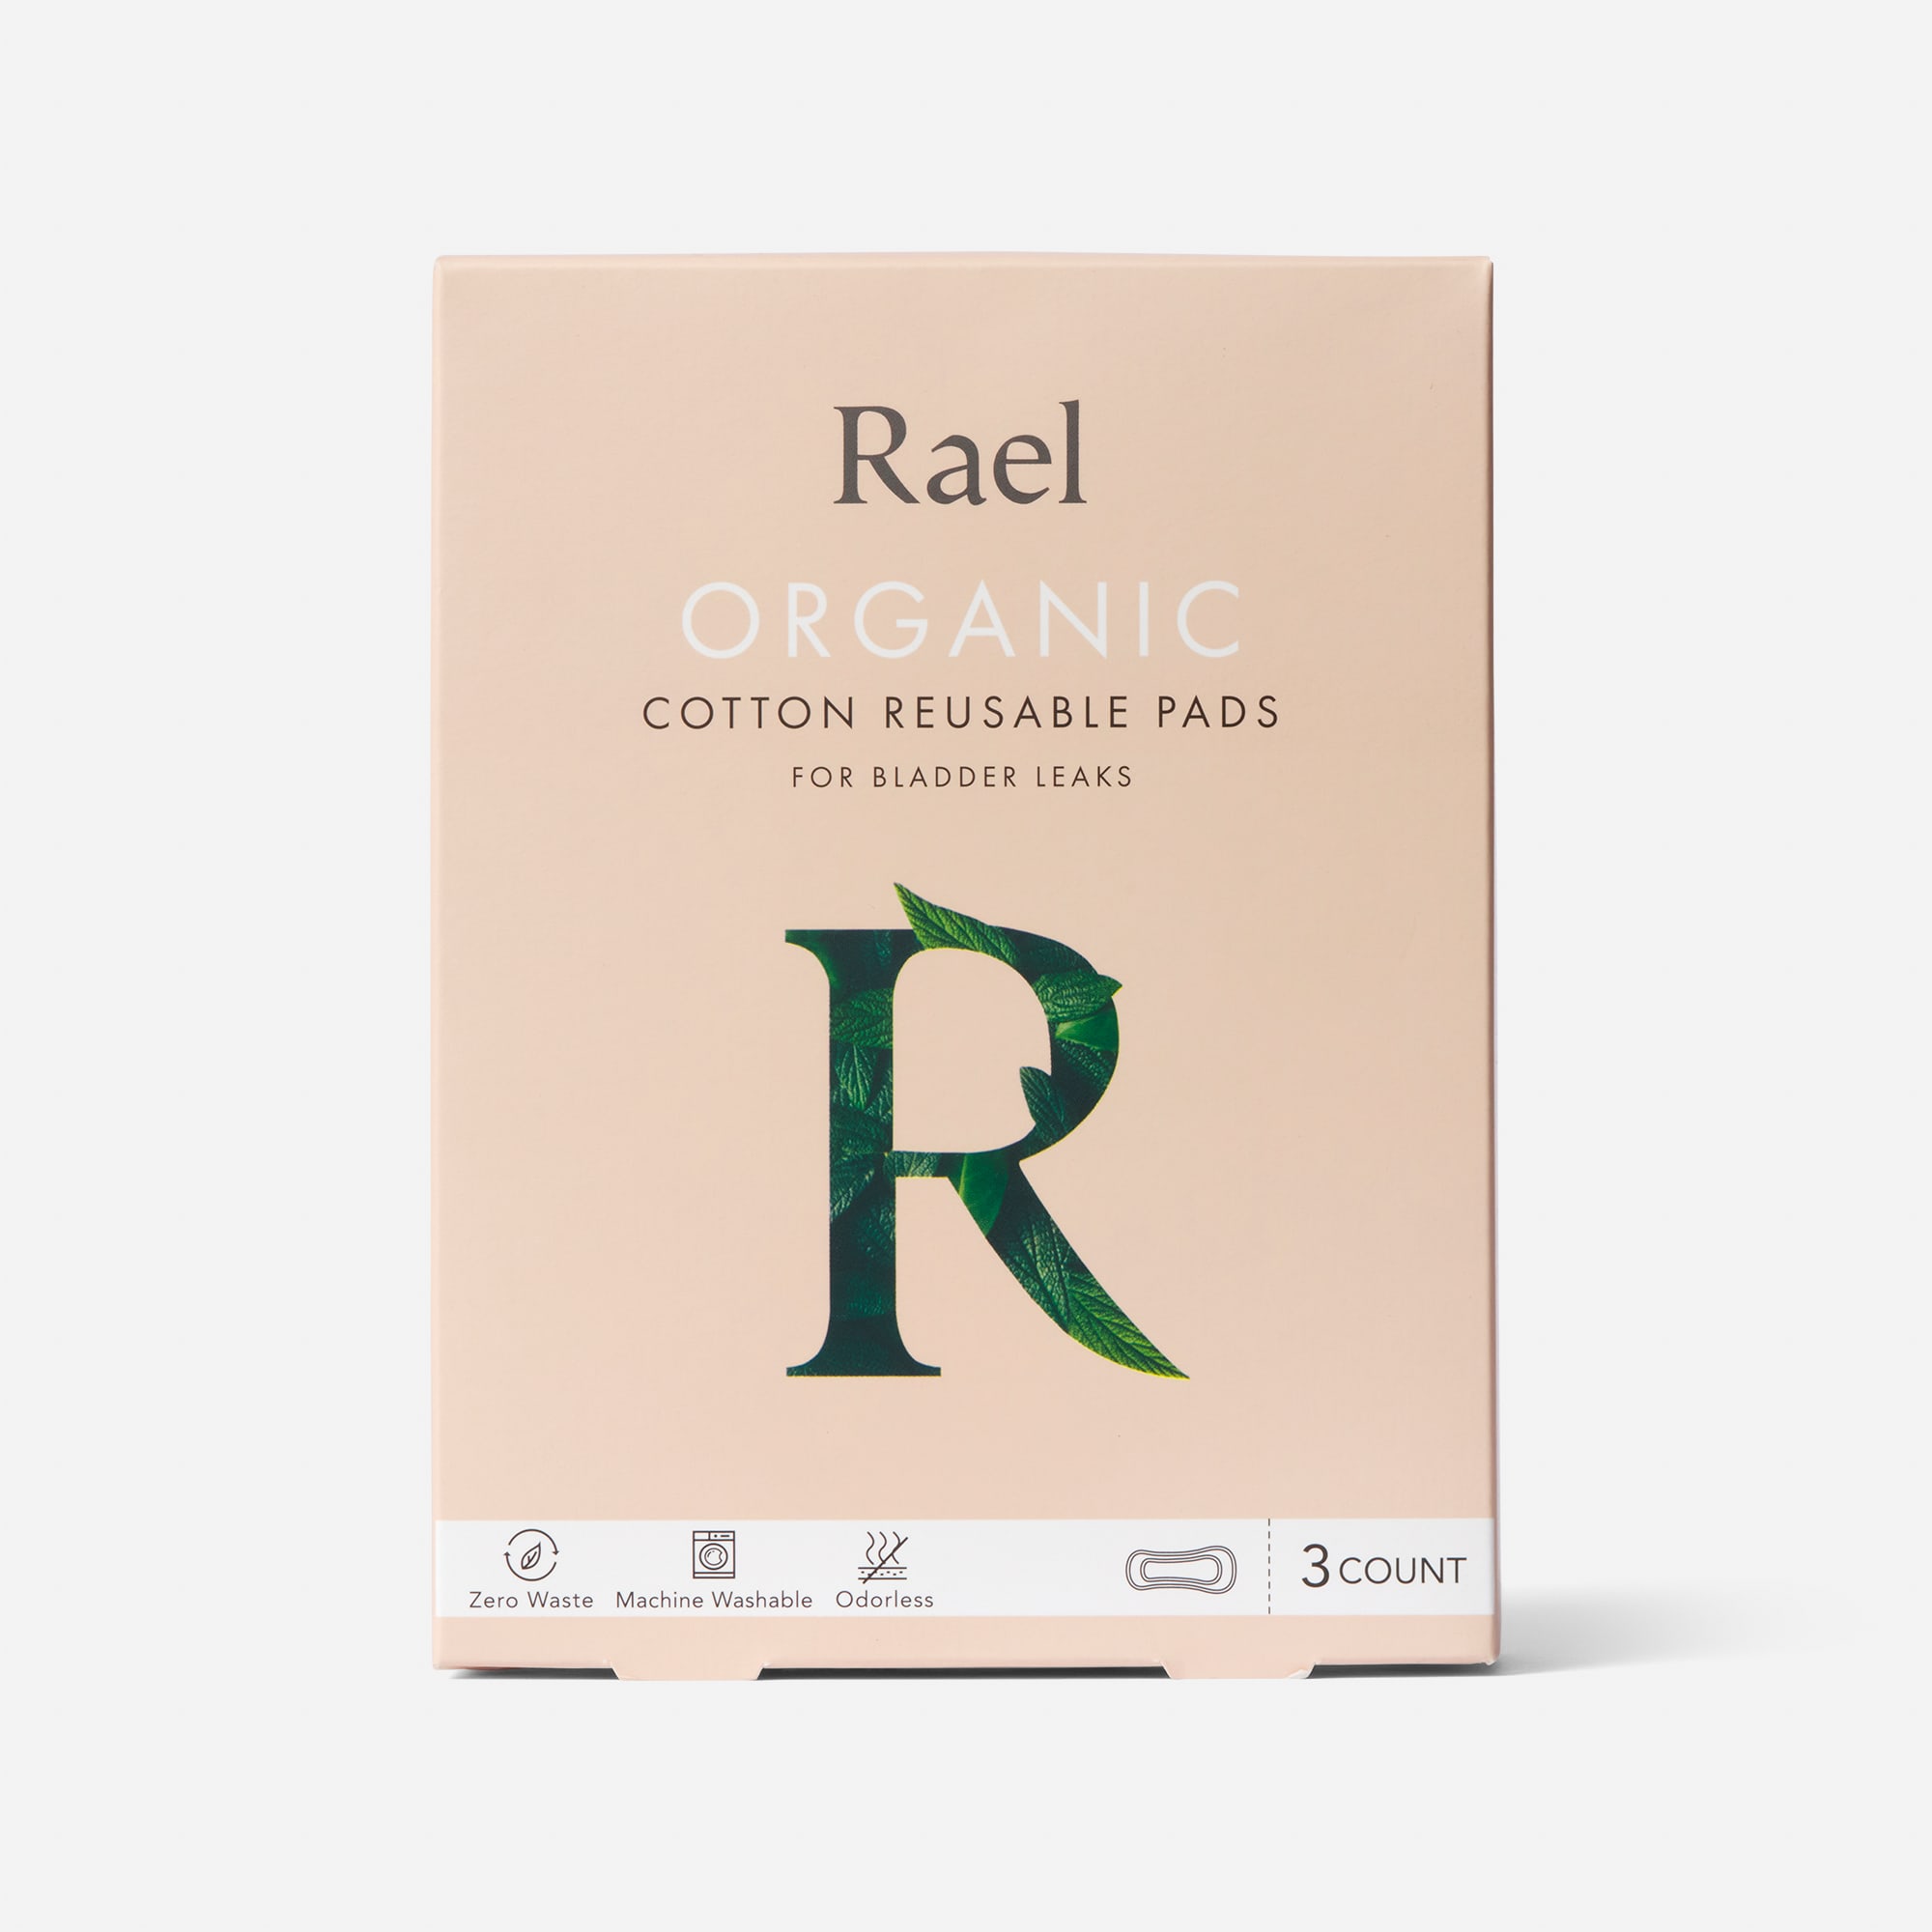 HSA Eligible  Rael Organic Cotton Reusable Pads for Bladder Leaks